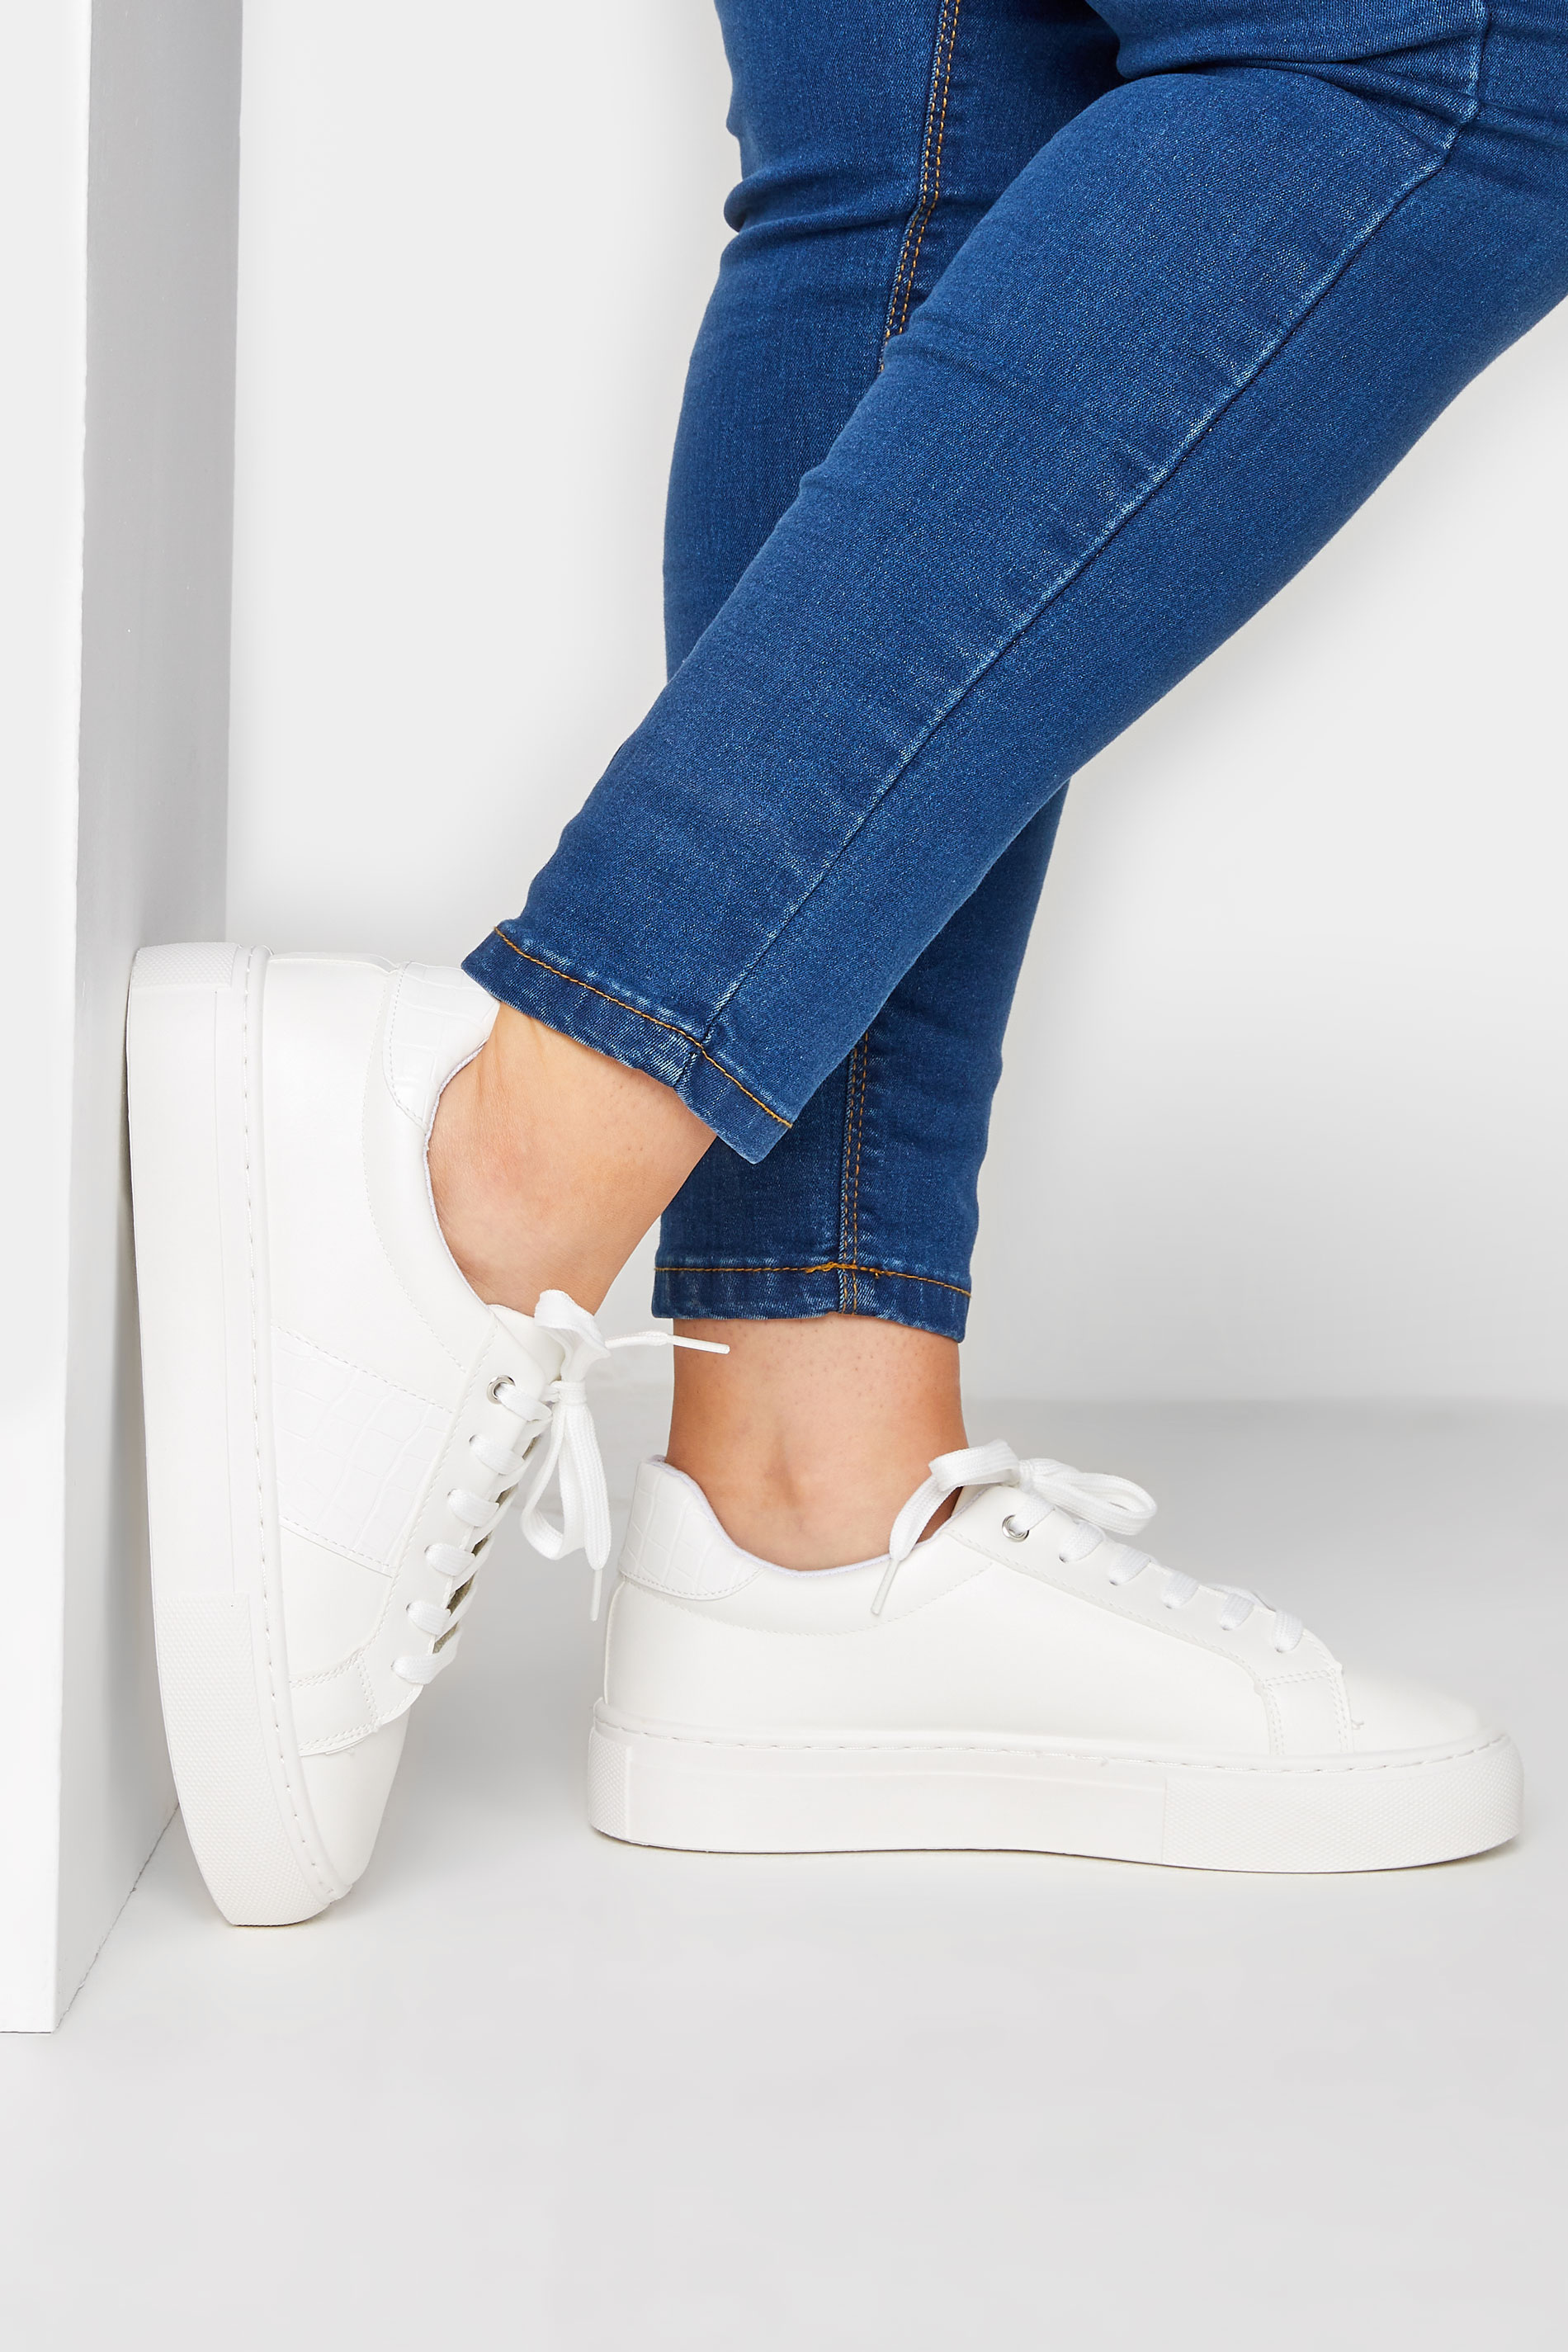 White Stripe Platform Trainers In Extra Wide EEE Fit 1